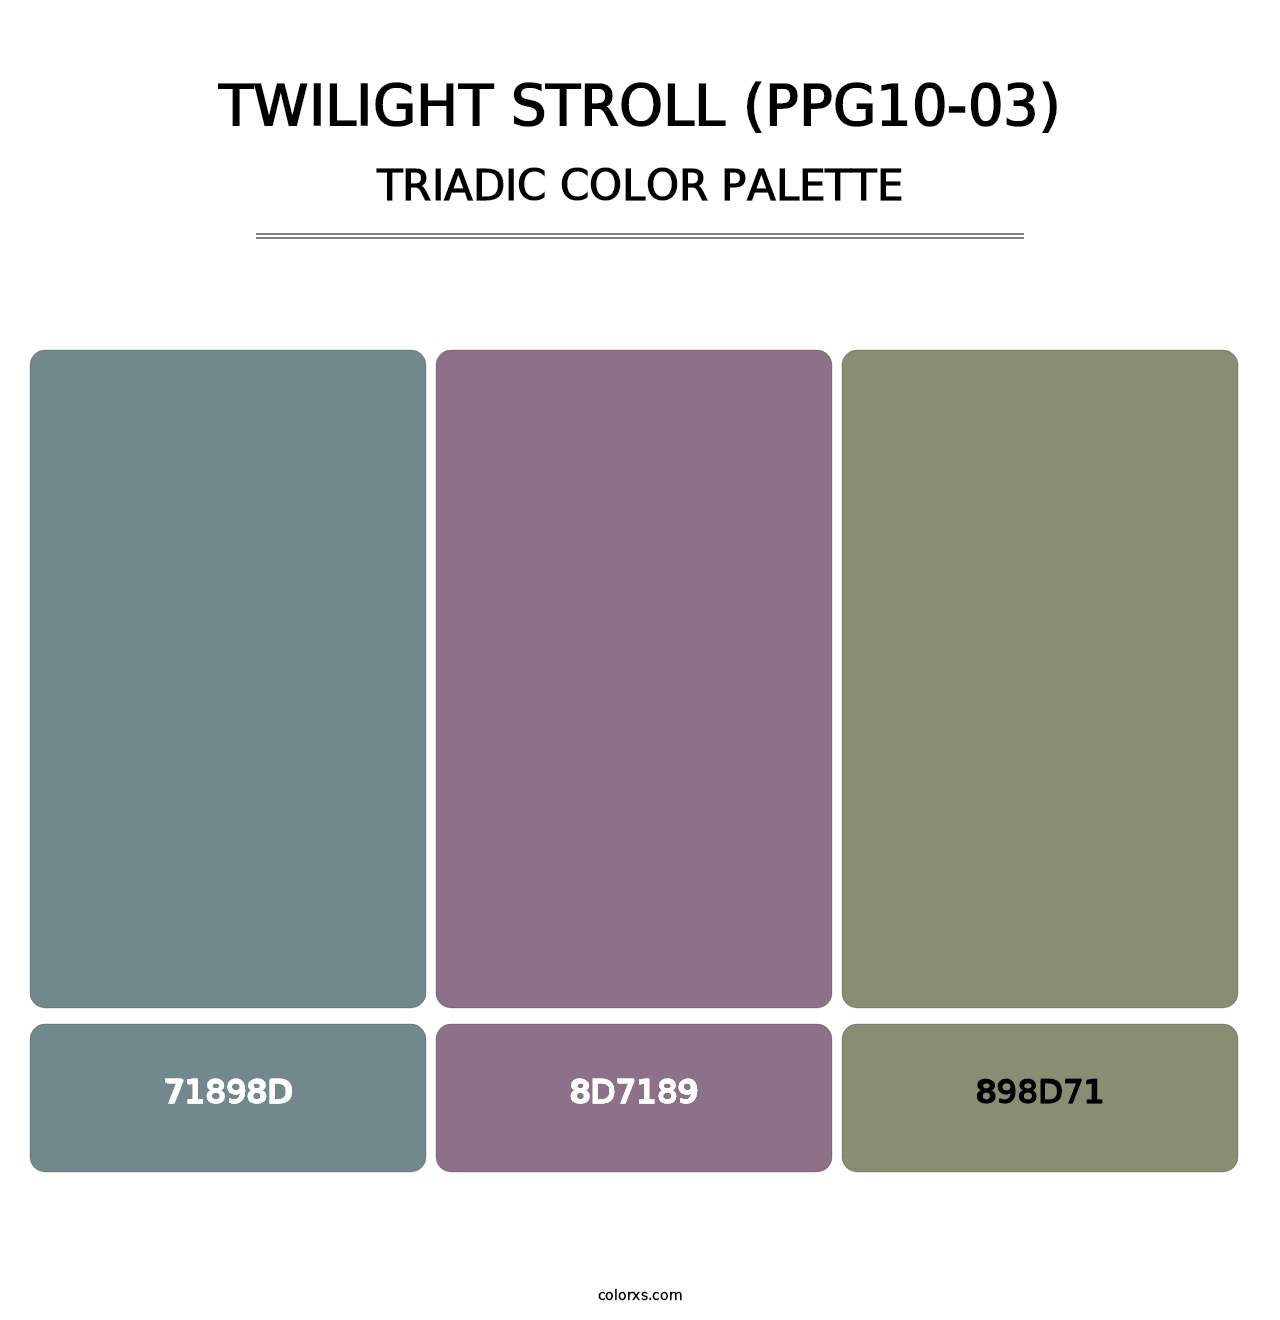 Twilight Stroll (PPG10-03) - Triadic Color Palette